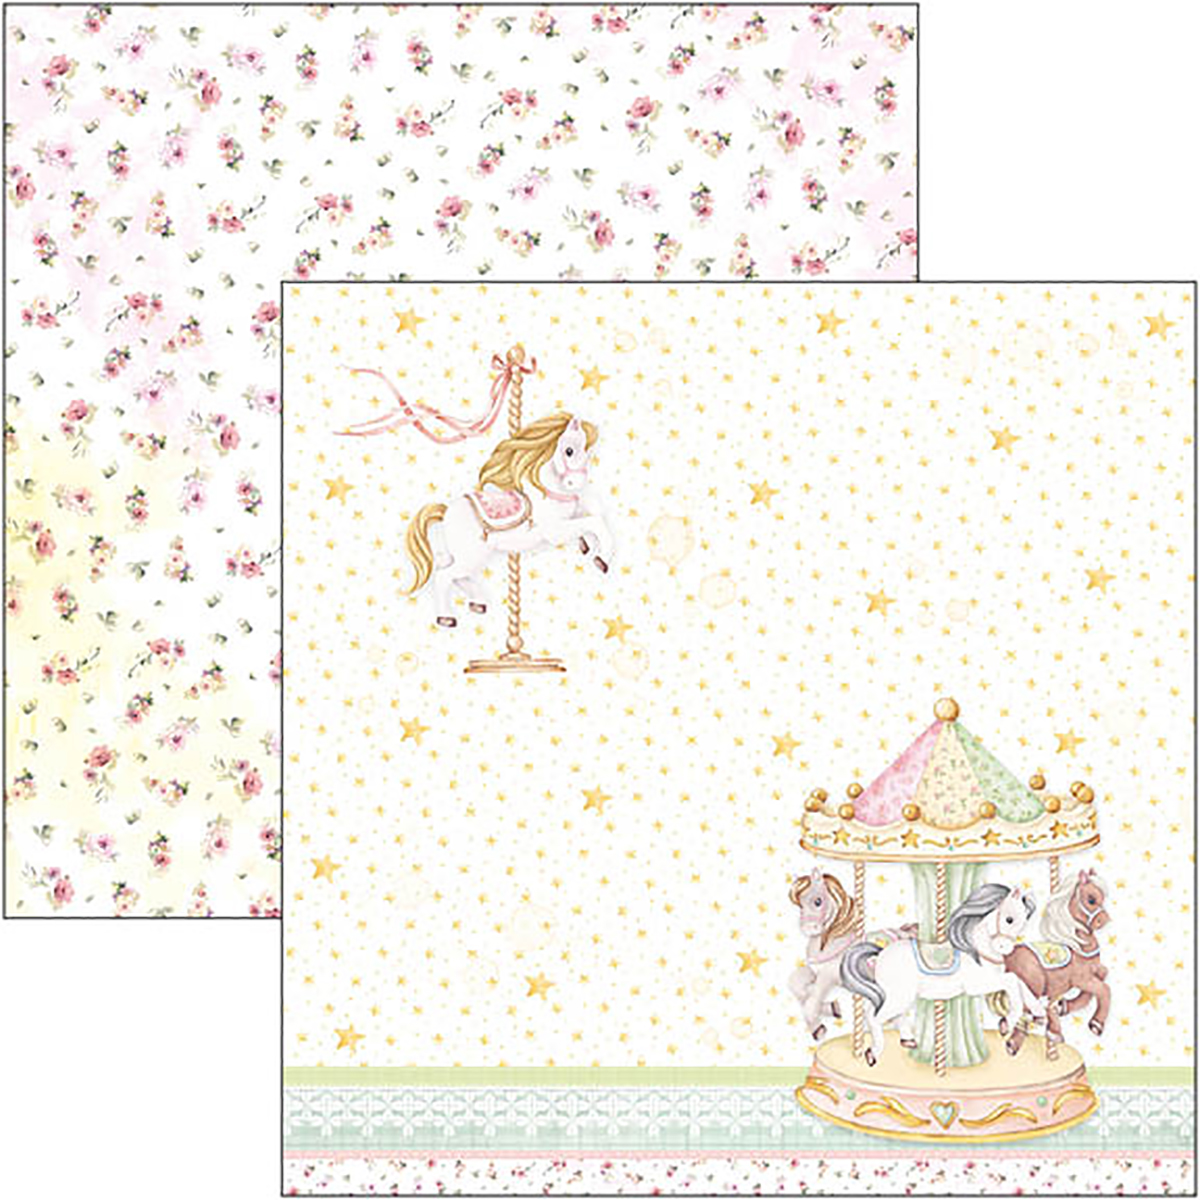 Ciao Bella - My tiny world - Paper Pack  (12 ark)  12 x 12"